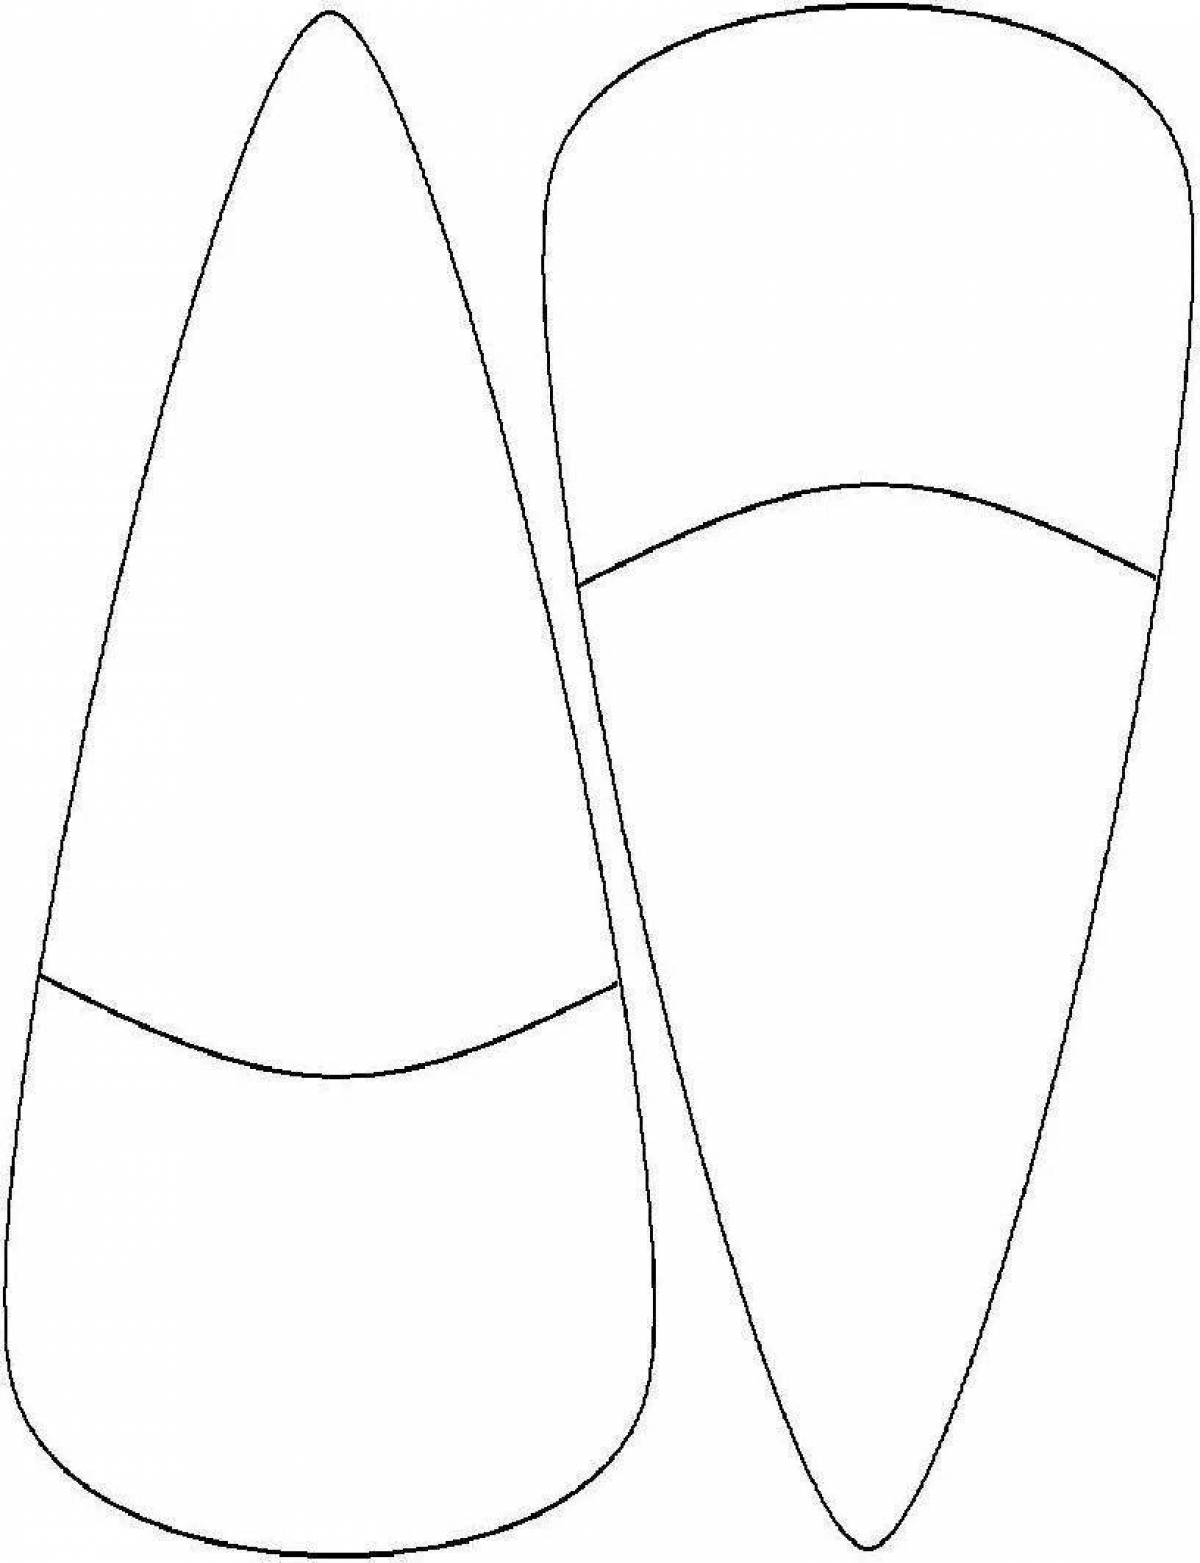 Coloring page cheerful pattern of petals